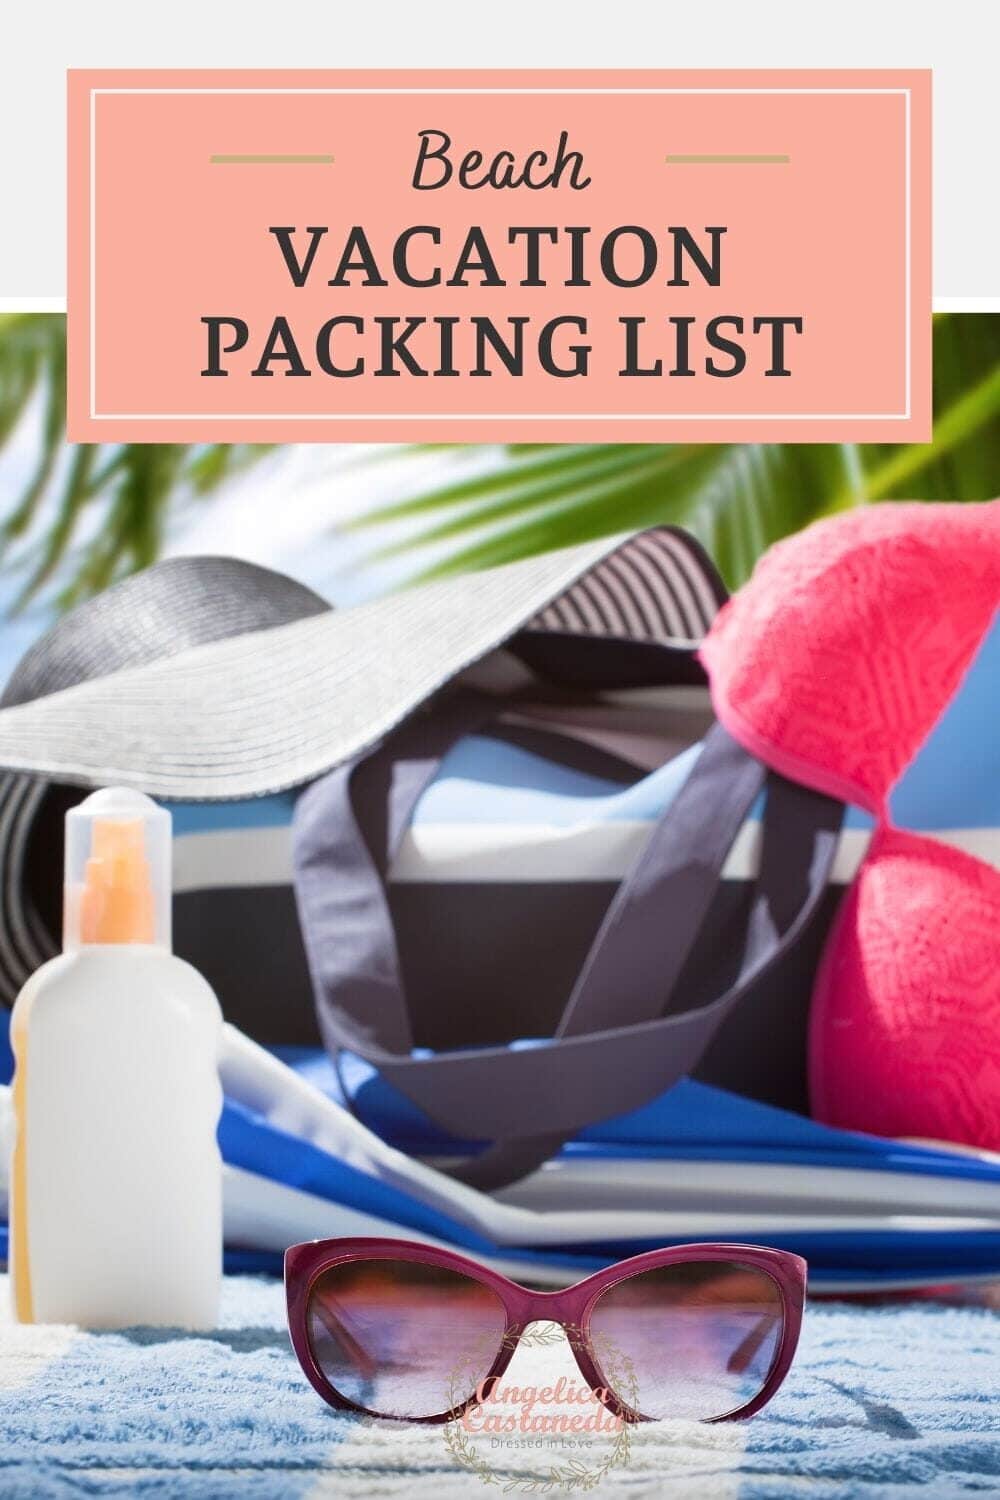 Pink sun glasses, white bottle, blue and white beach bag, navy blue and white sun hat and pink bathing suit top on a blue and white towel perfect for a beach vacation packing list.